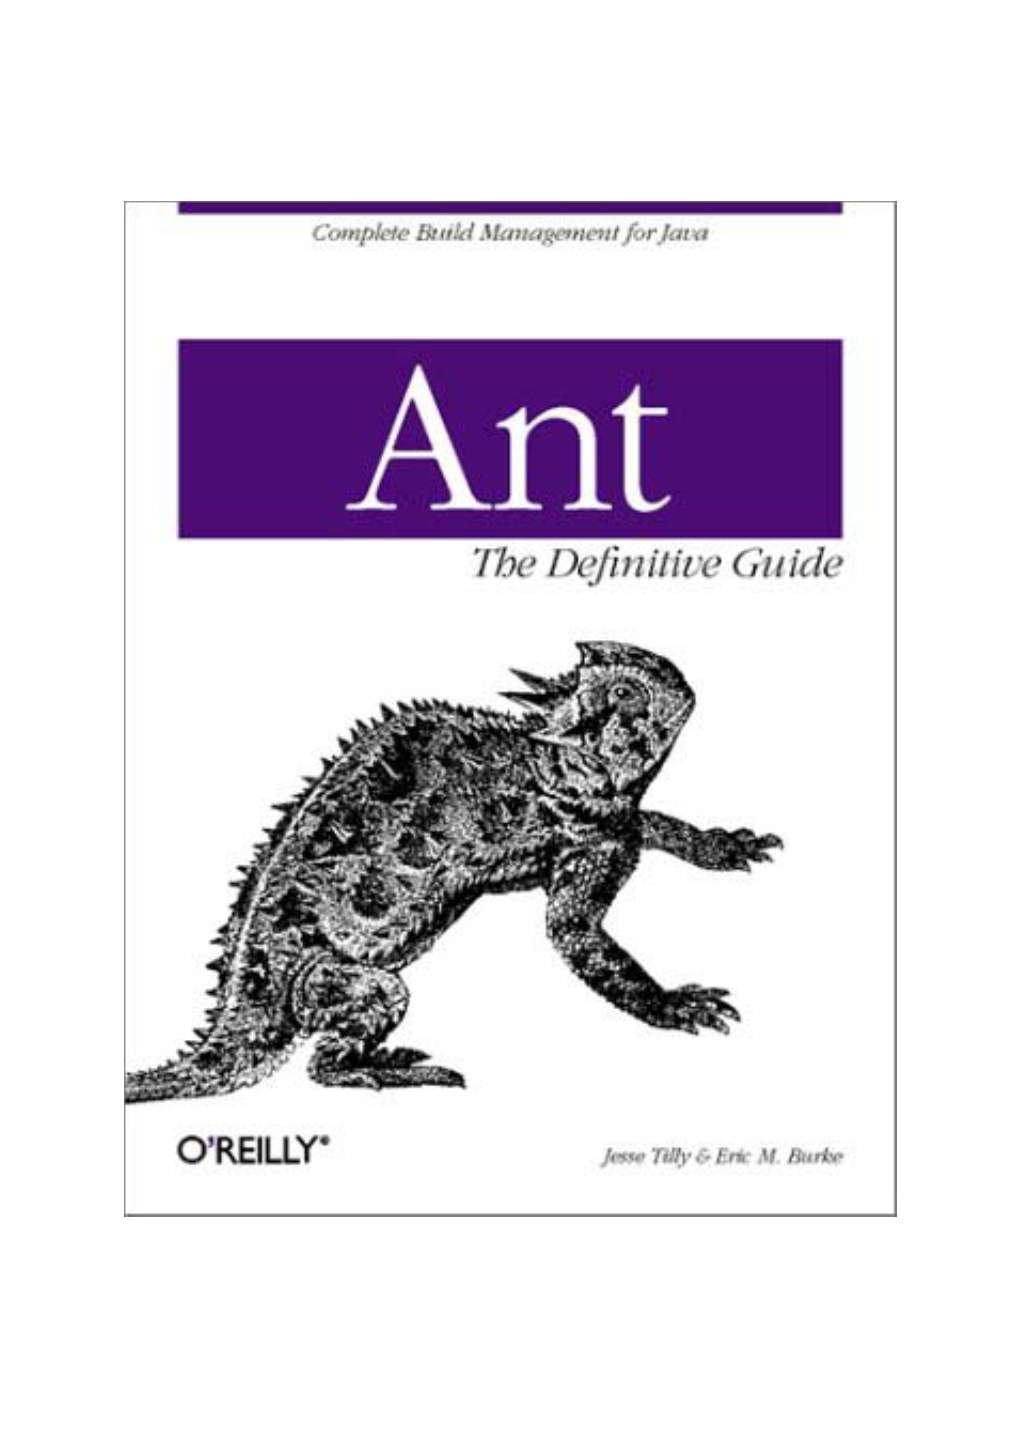 O'reilly Ant the Definitive Guide.Pdf